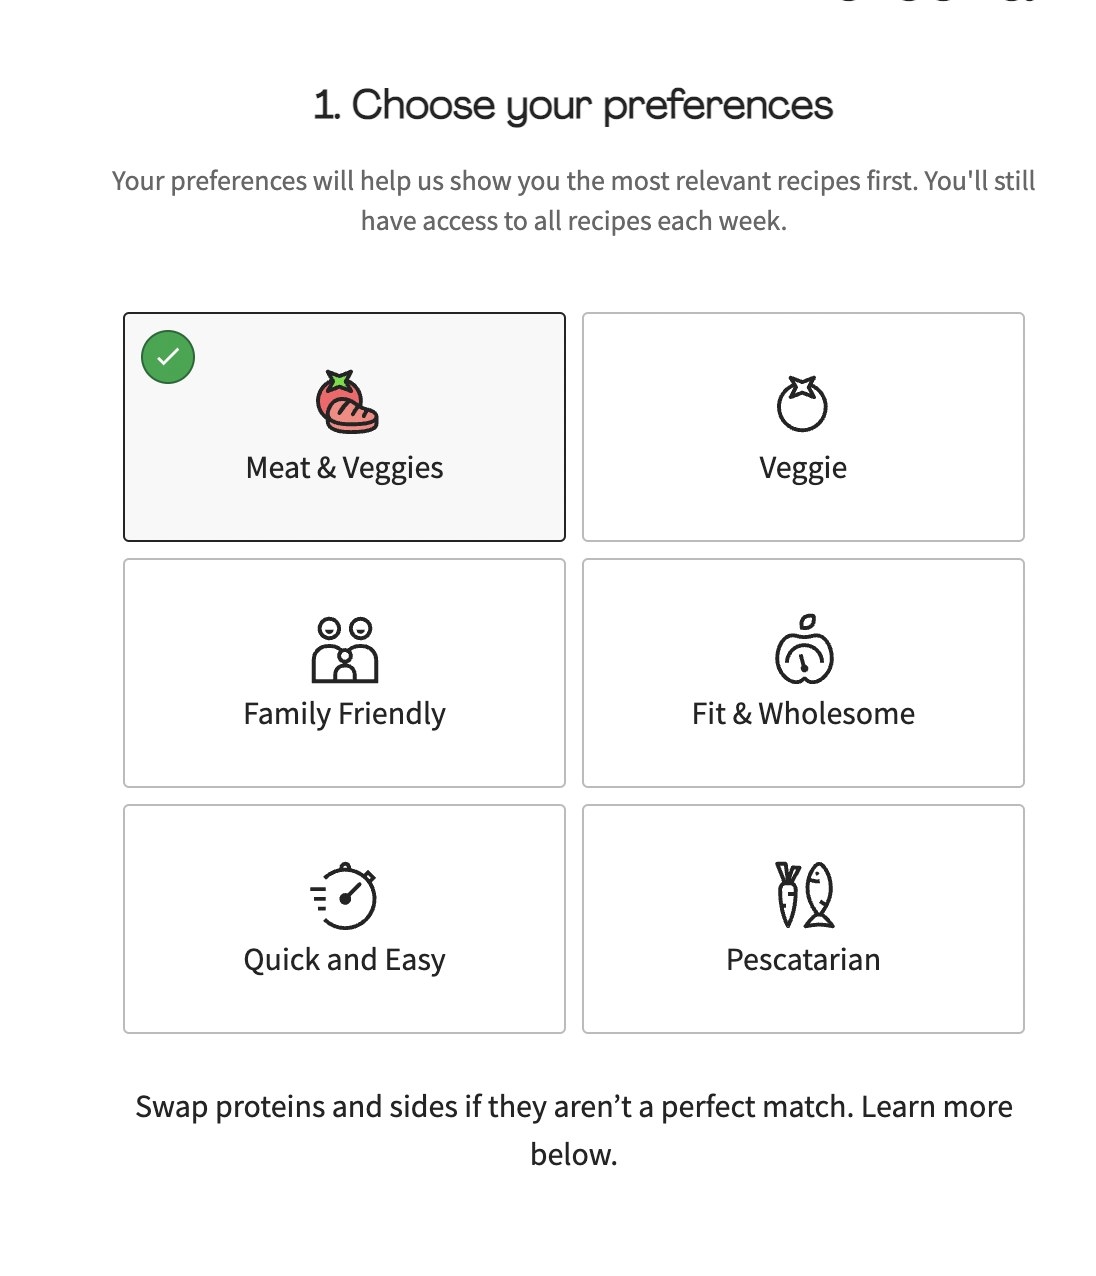 the first step asking about preferences. choices include meat &amp;amp; veggies, veggie, family friendly, fit &amp;amp; wholesome, quick and easy, and pescatarian